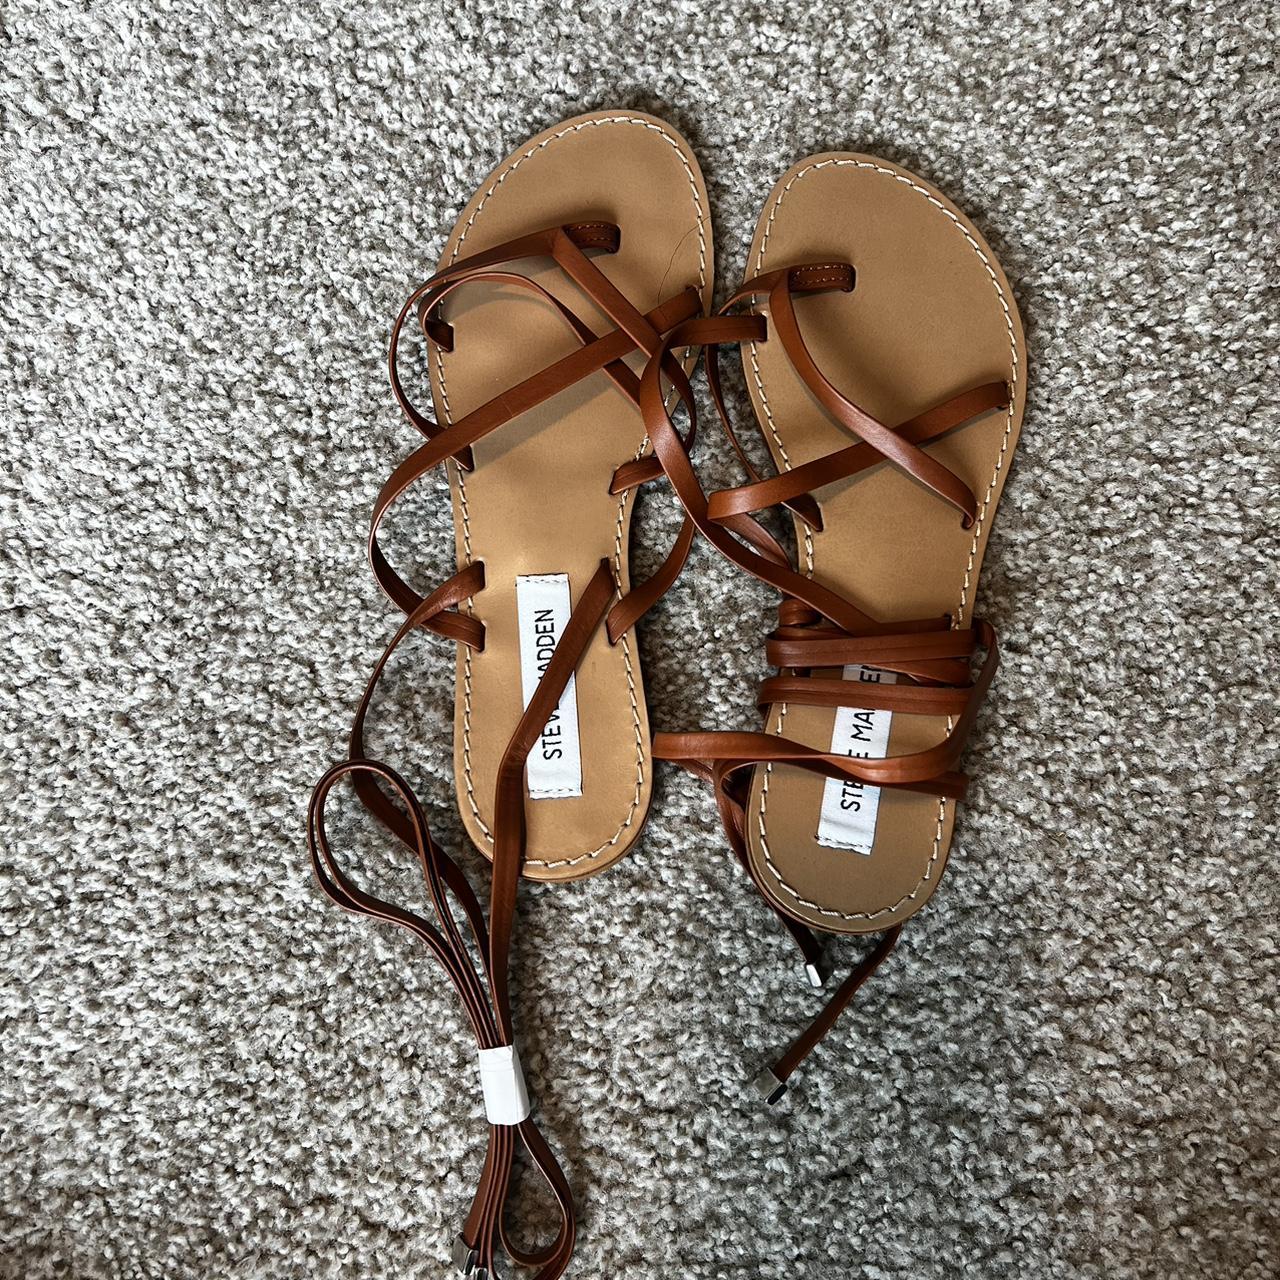 Buyr.com | Flats | Steve Madden Travel Tan Leather Strappy Open Toe Pyramid  Studded Flat Sandals (Tan, 5)